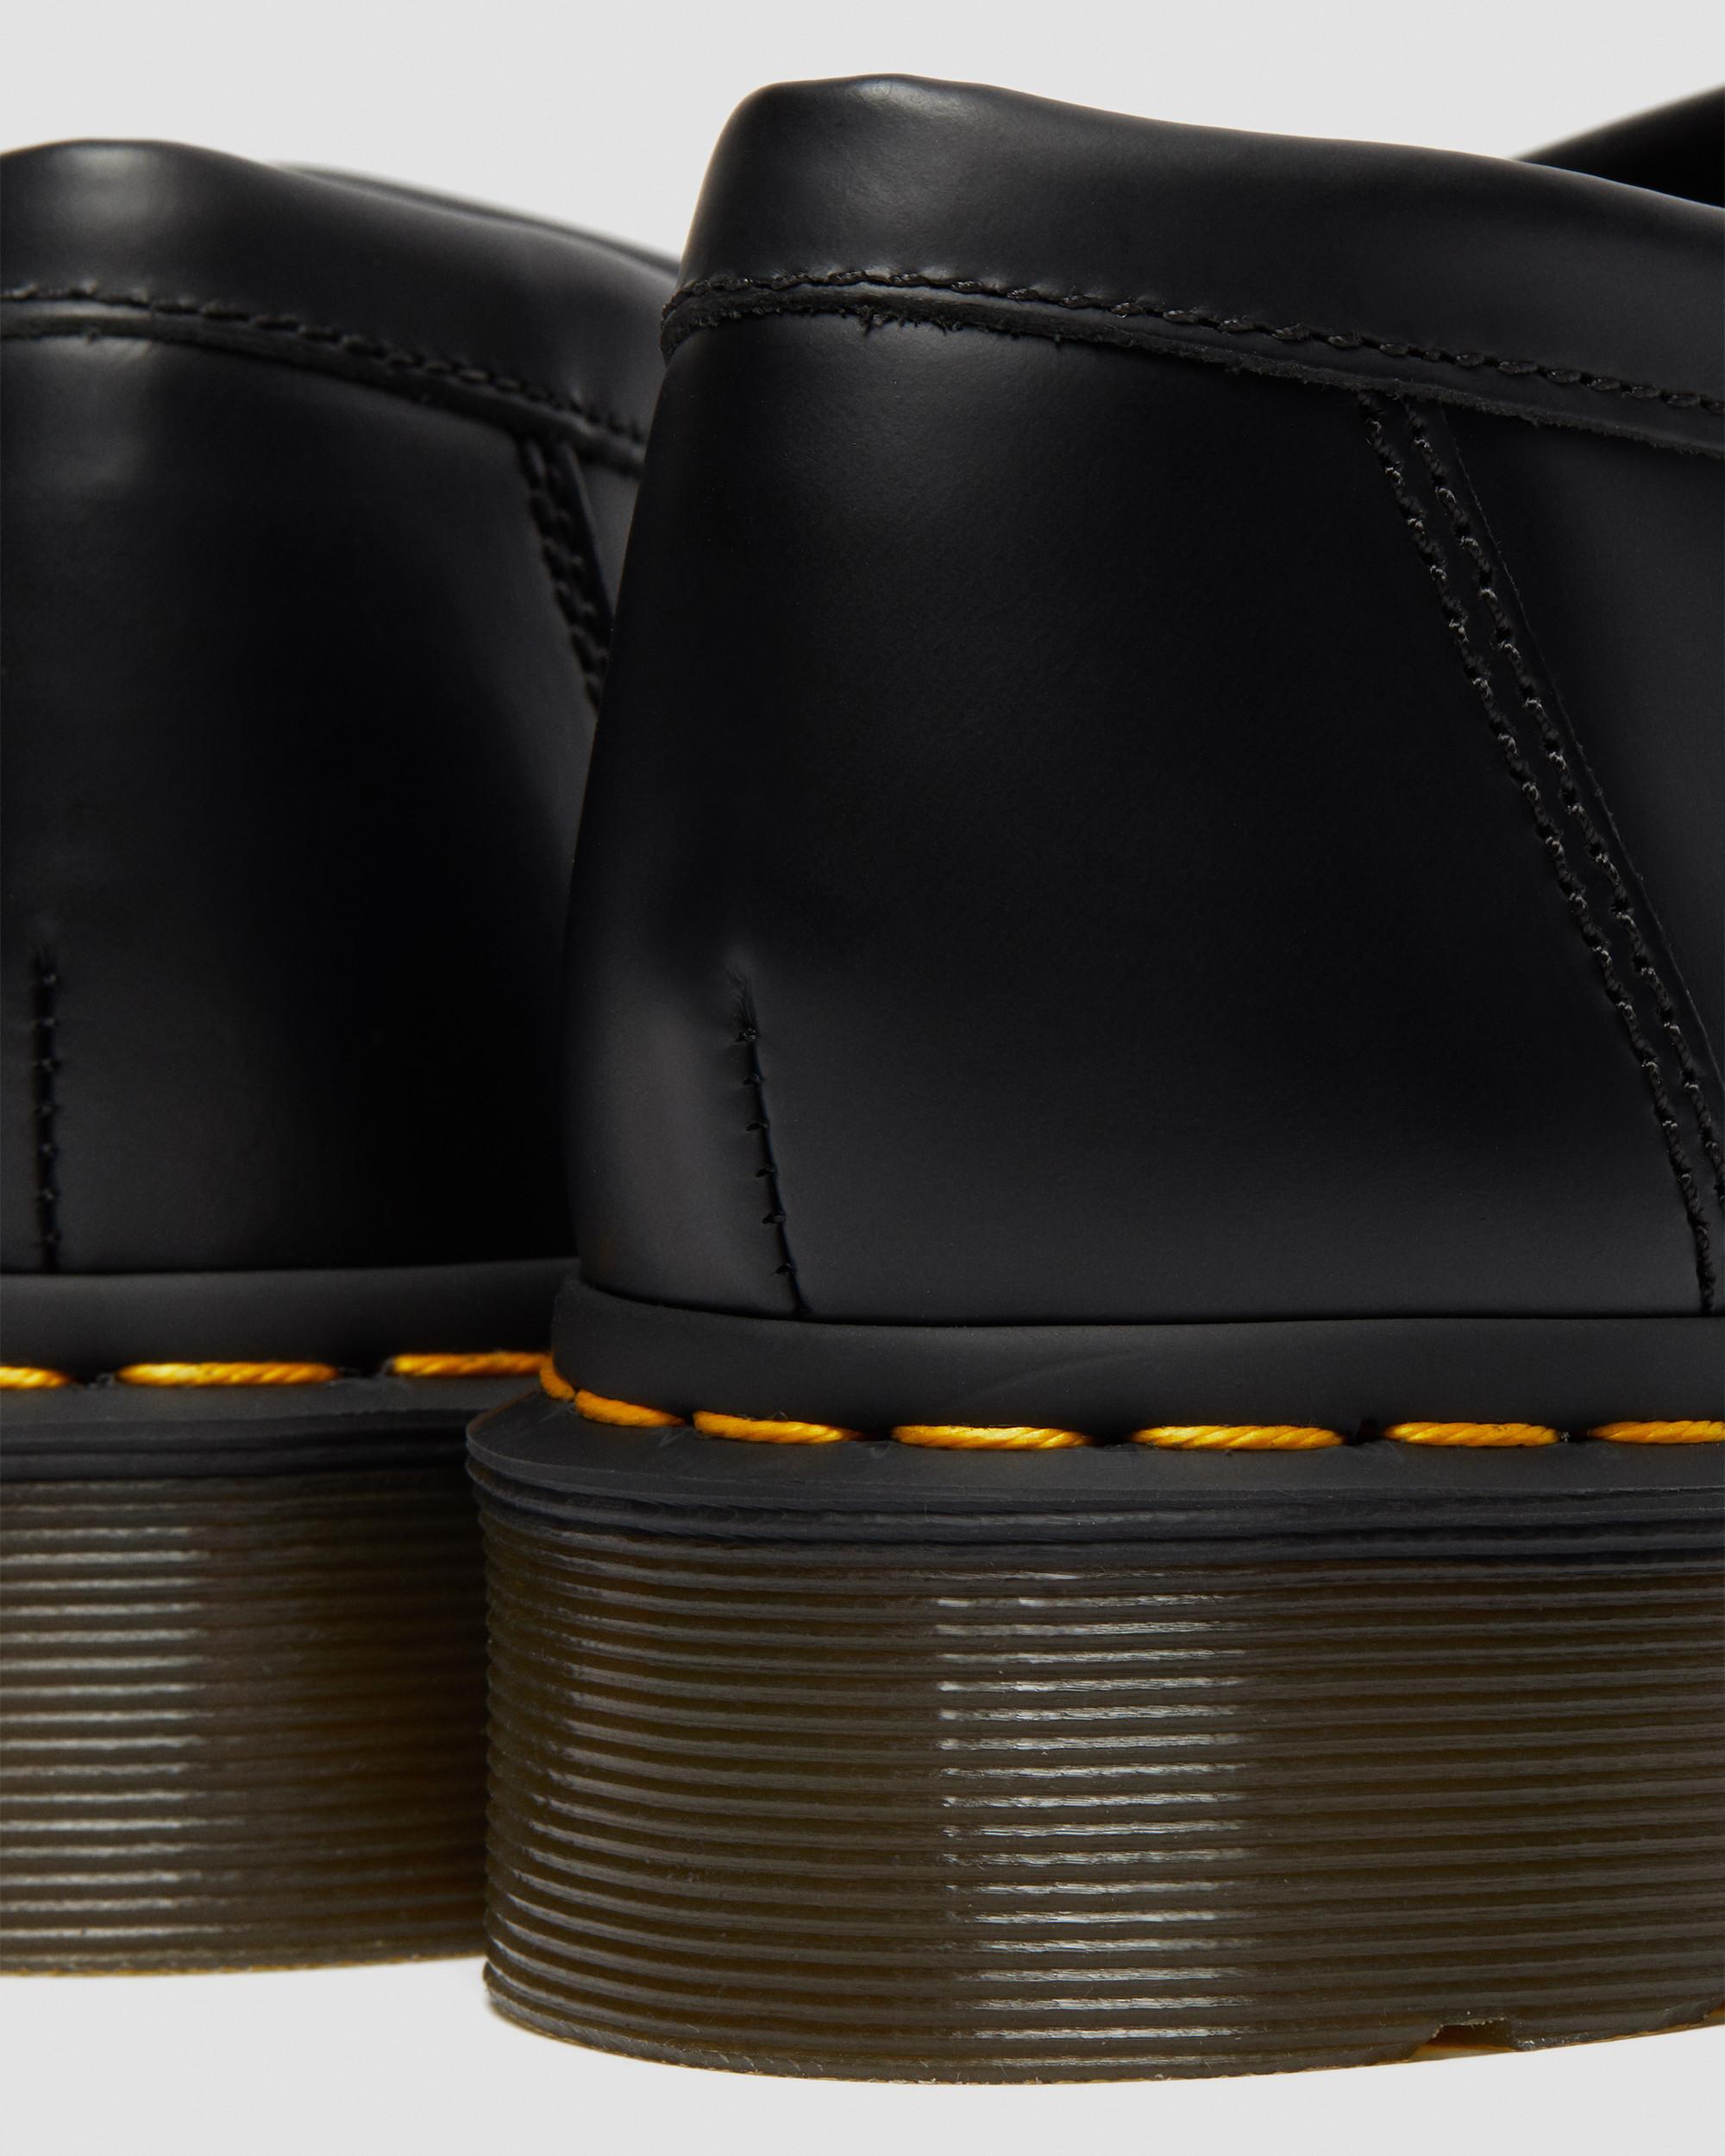 Adrian Yellow Stitch Leather Tassel Loafers in Black